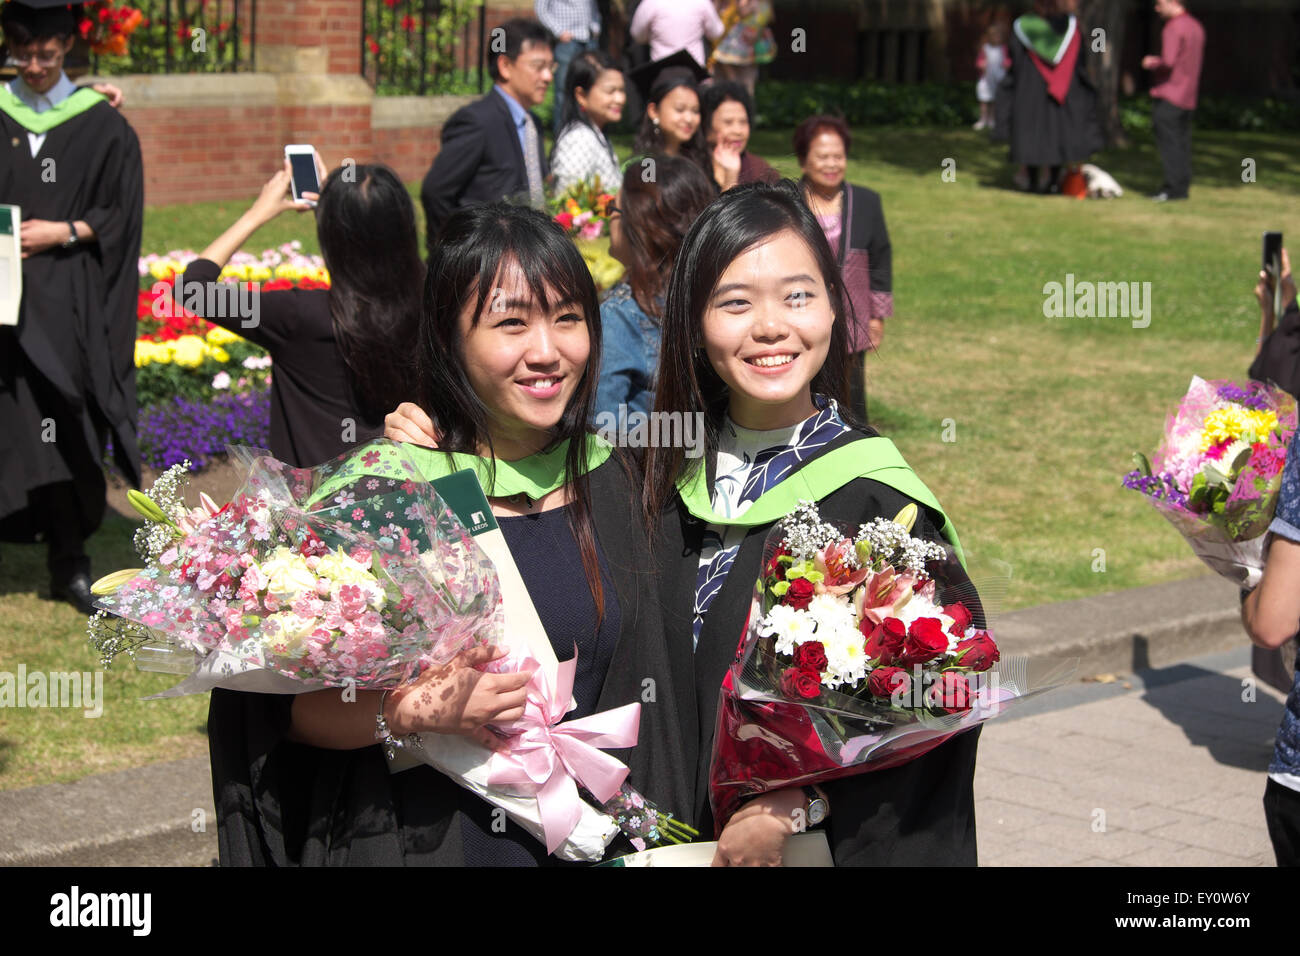 Student Graduation Day at the University of Leeds for two young female asian students July 2015 Stock Photo